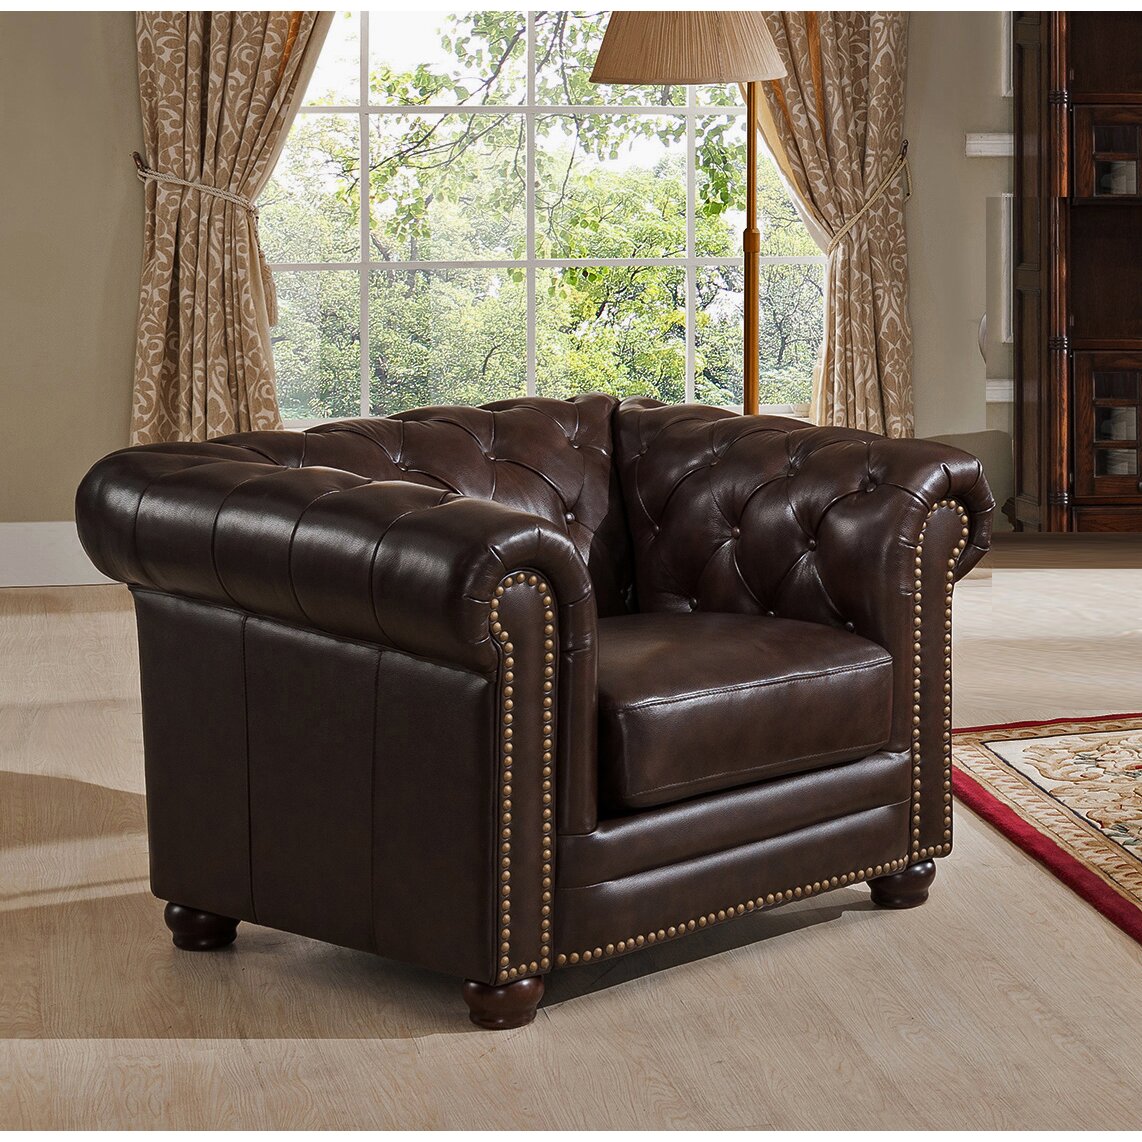 Amax Kensington Top Grain Leather Chesterfield Sofa and